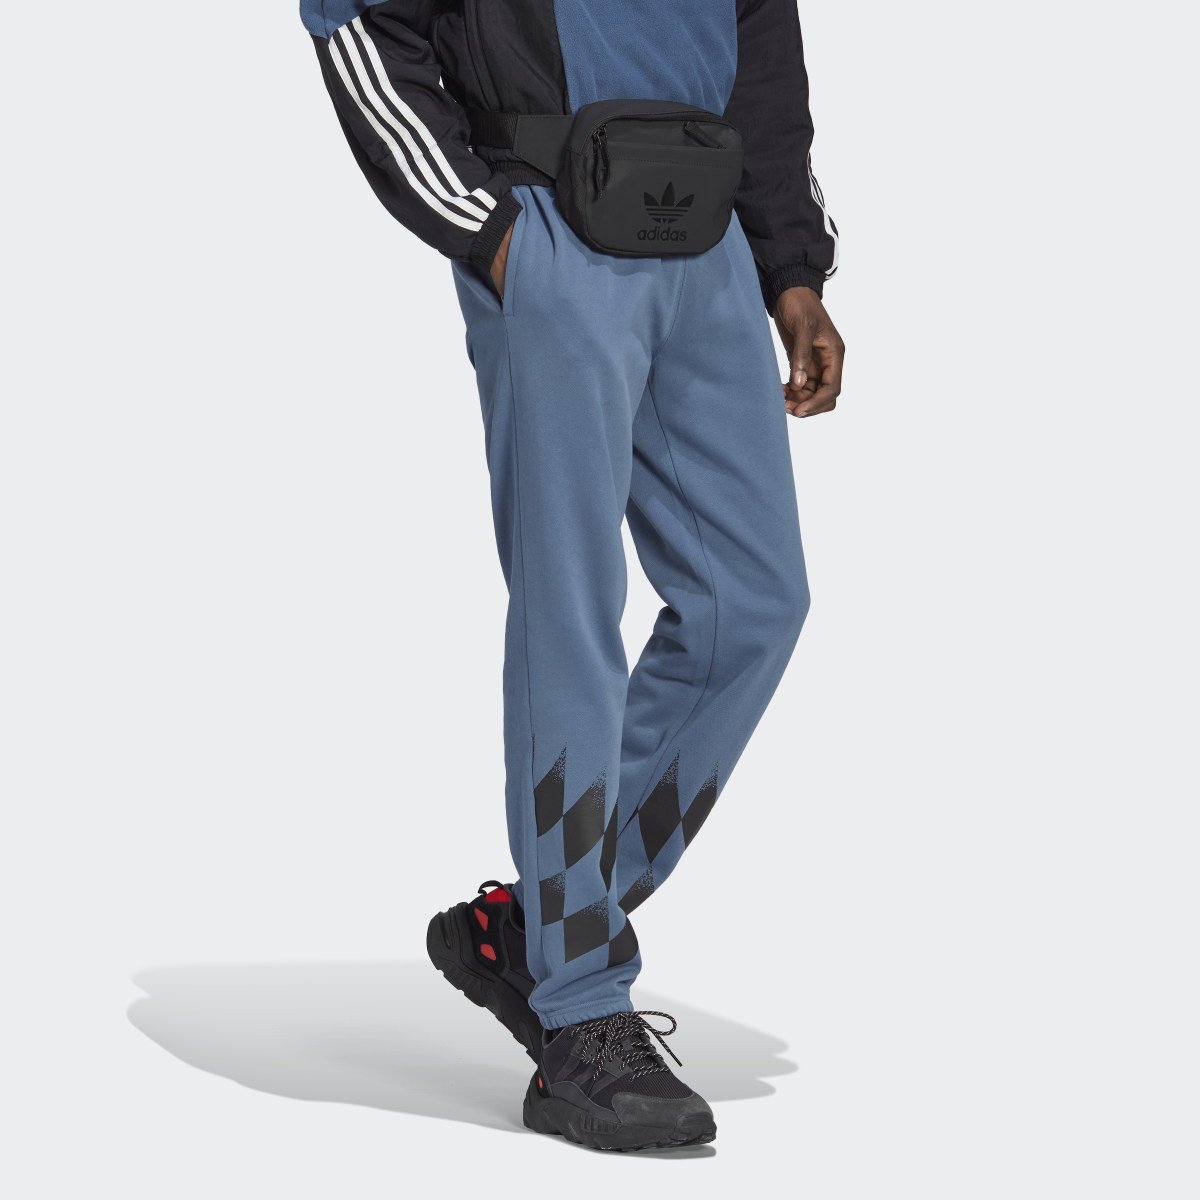 Adidas Rekive Placed Graphic Sweat Pants. 4